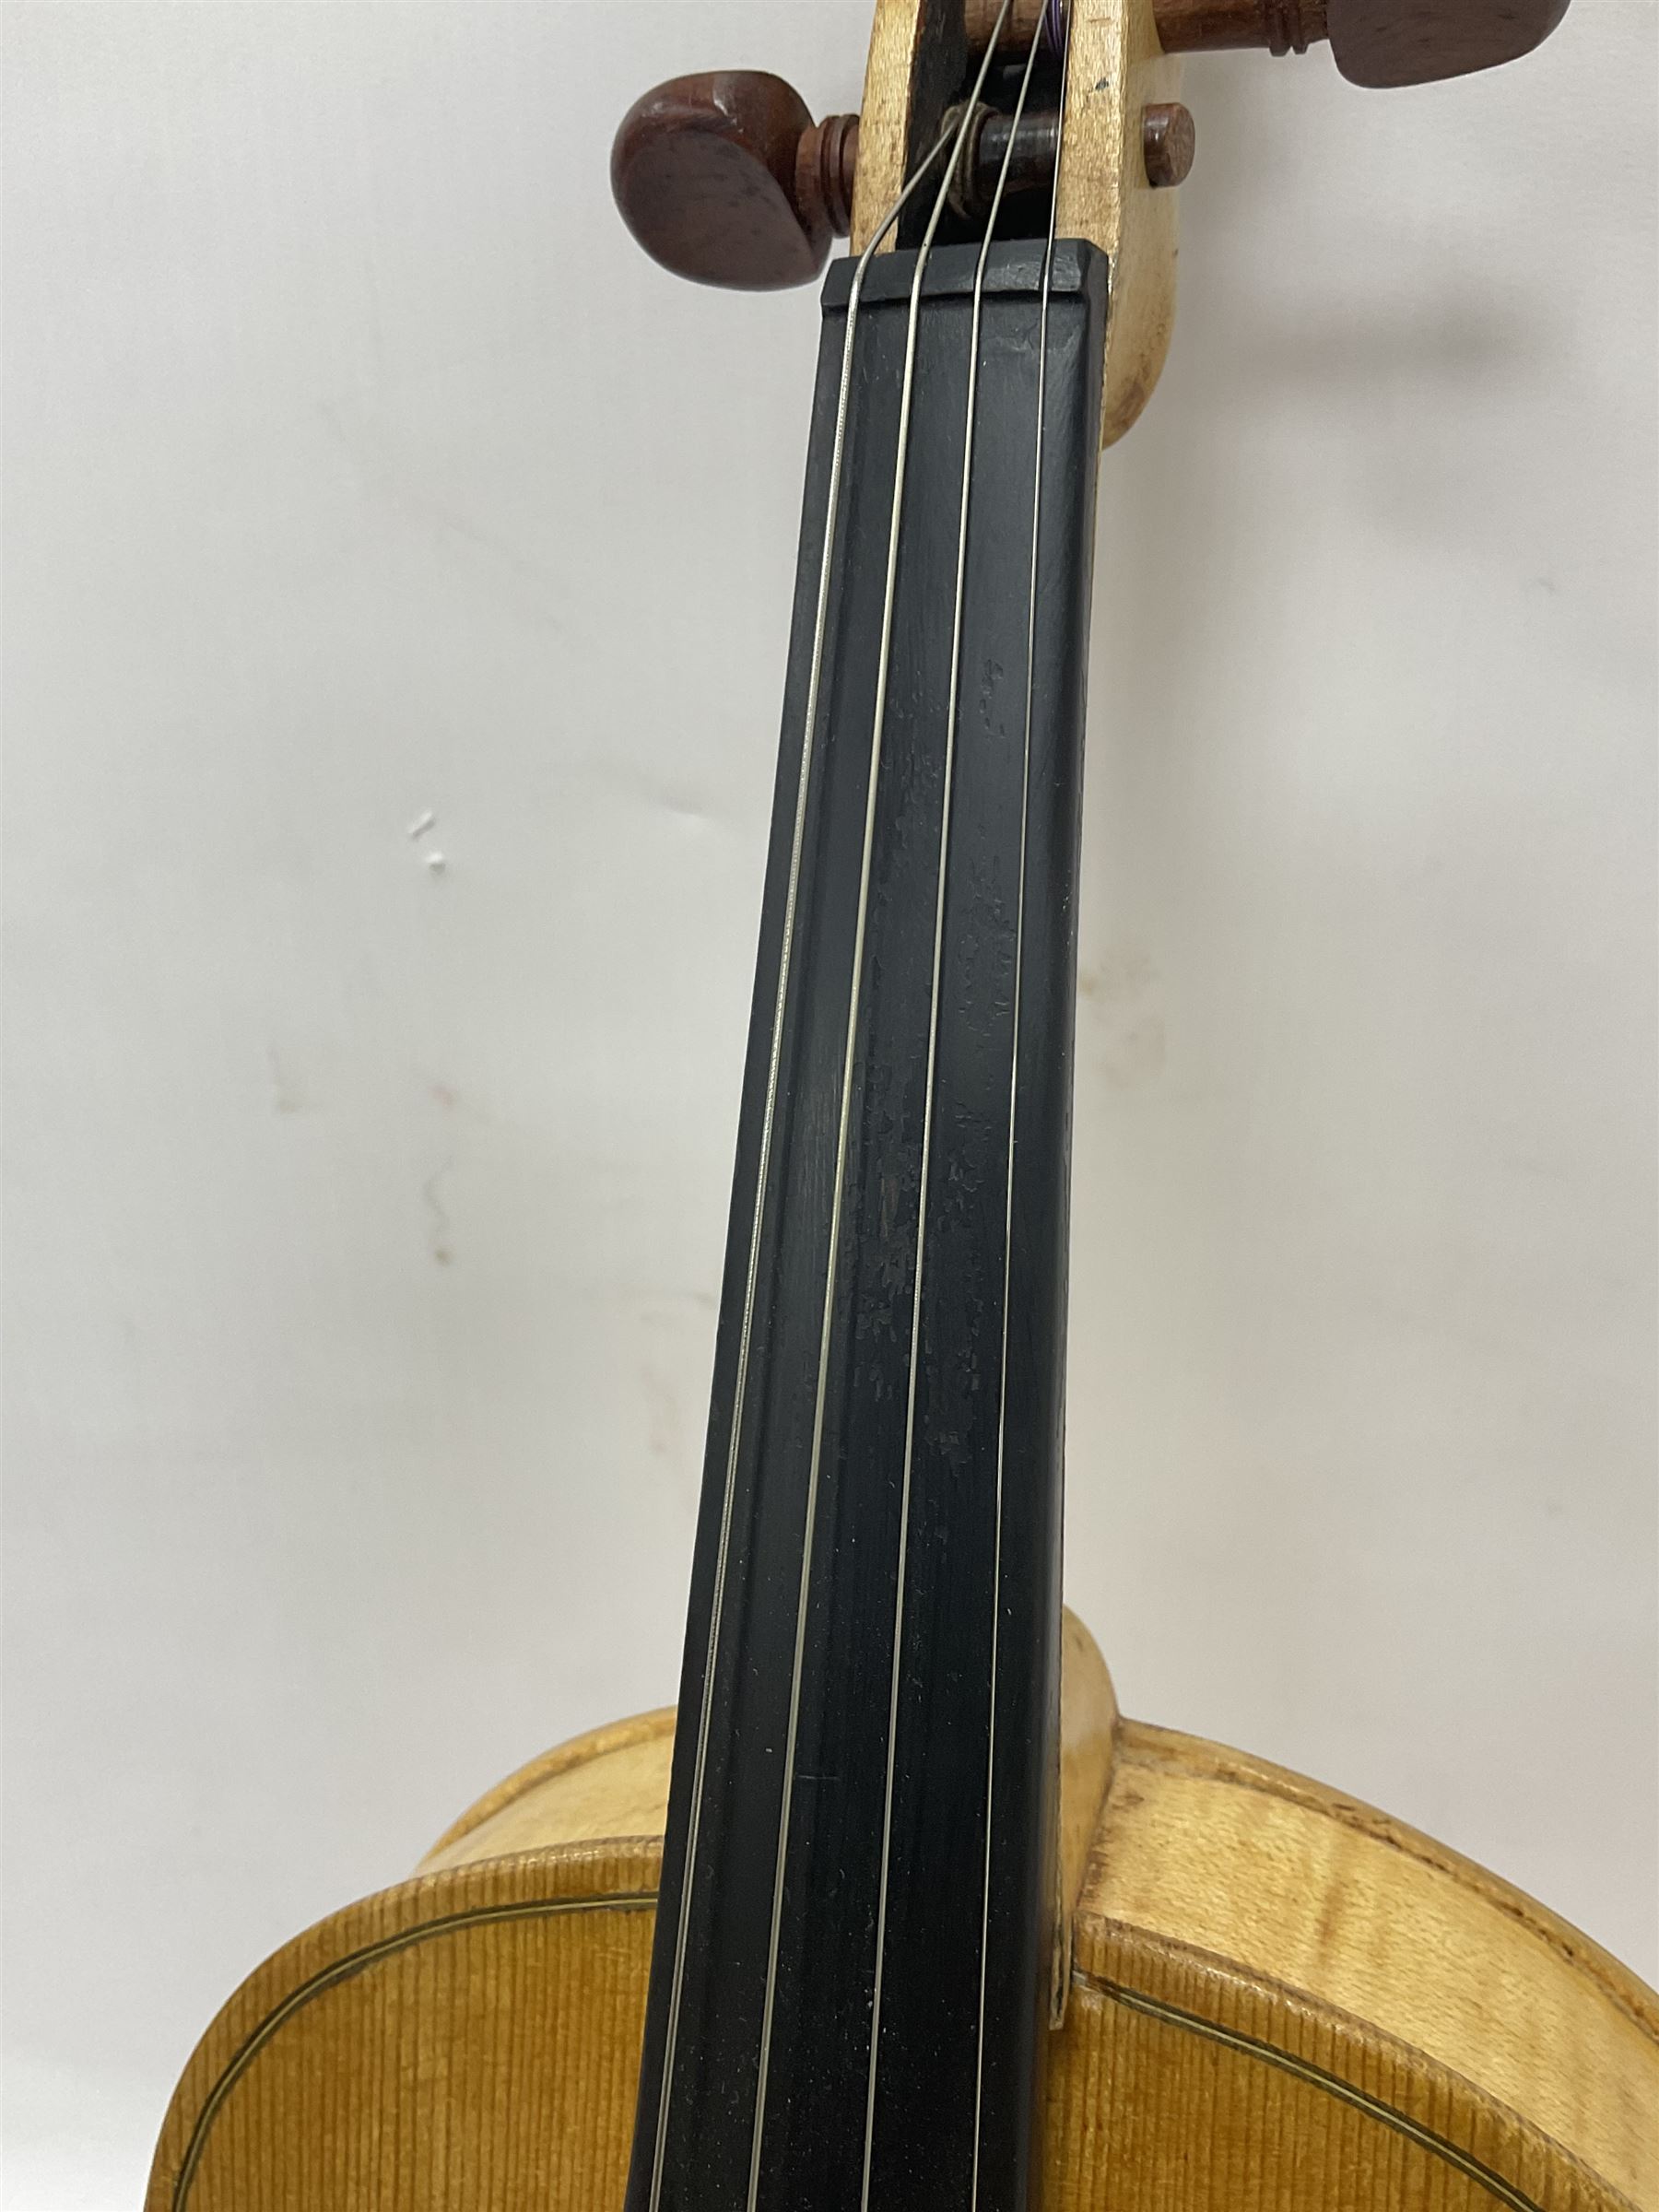 Copy of a full size Stradivarius violin with an ebonised fingerboard and tailpiece - Image 5 of 14